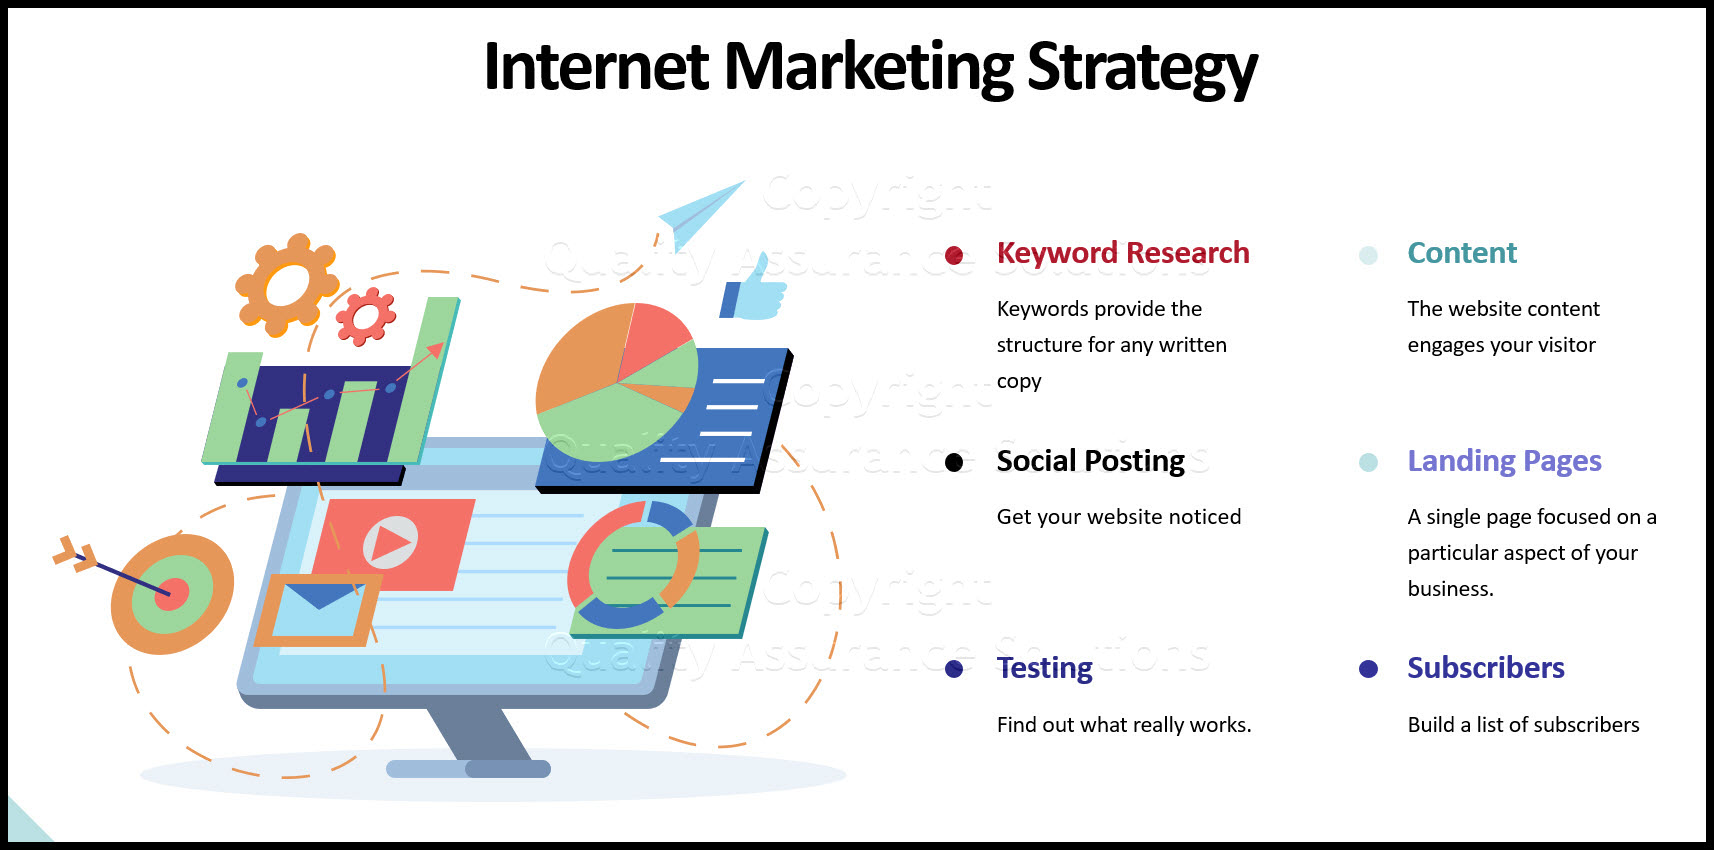 Review this article on internet marketing strategy which focuses on many elements from keyword research to landing page to subscribers